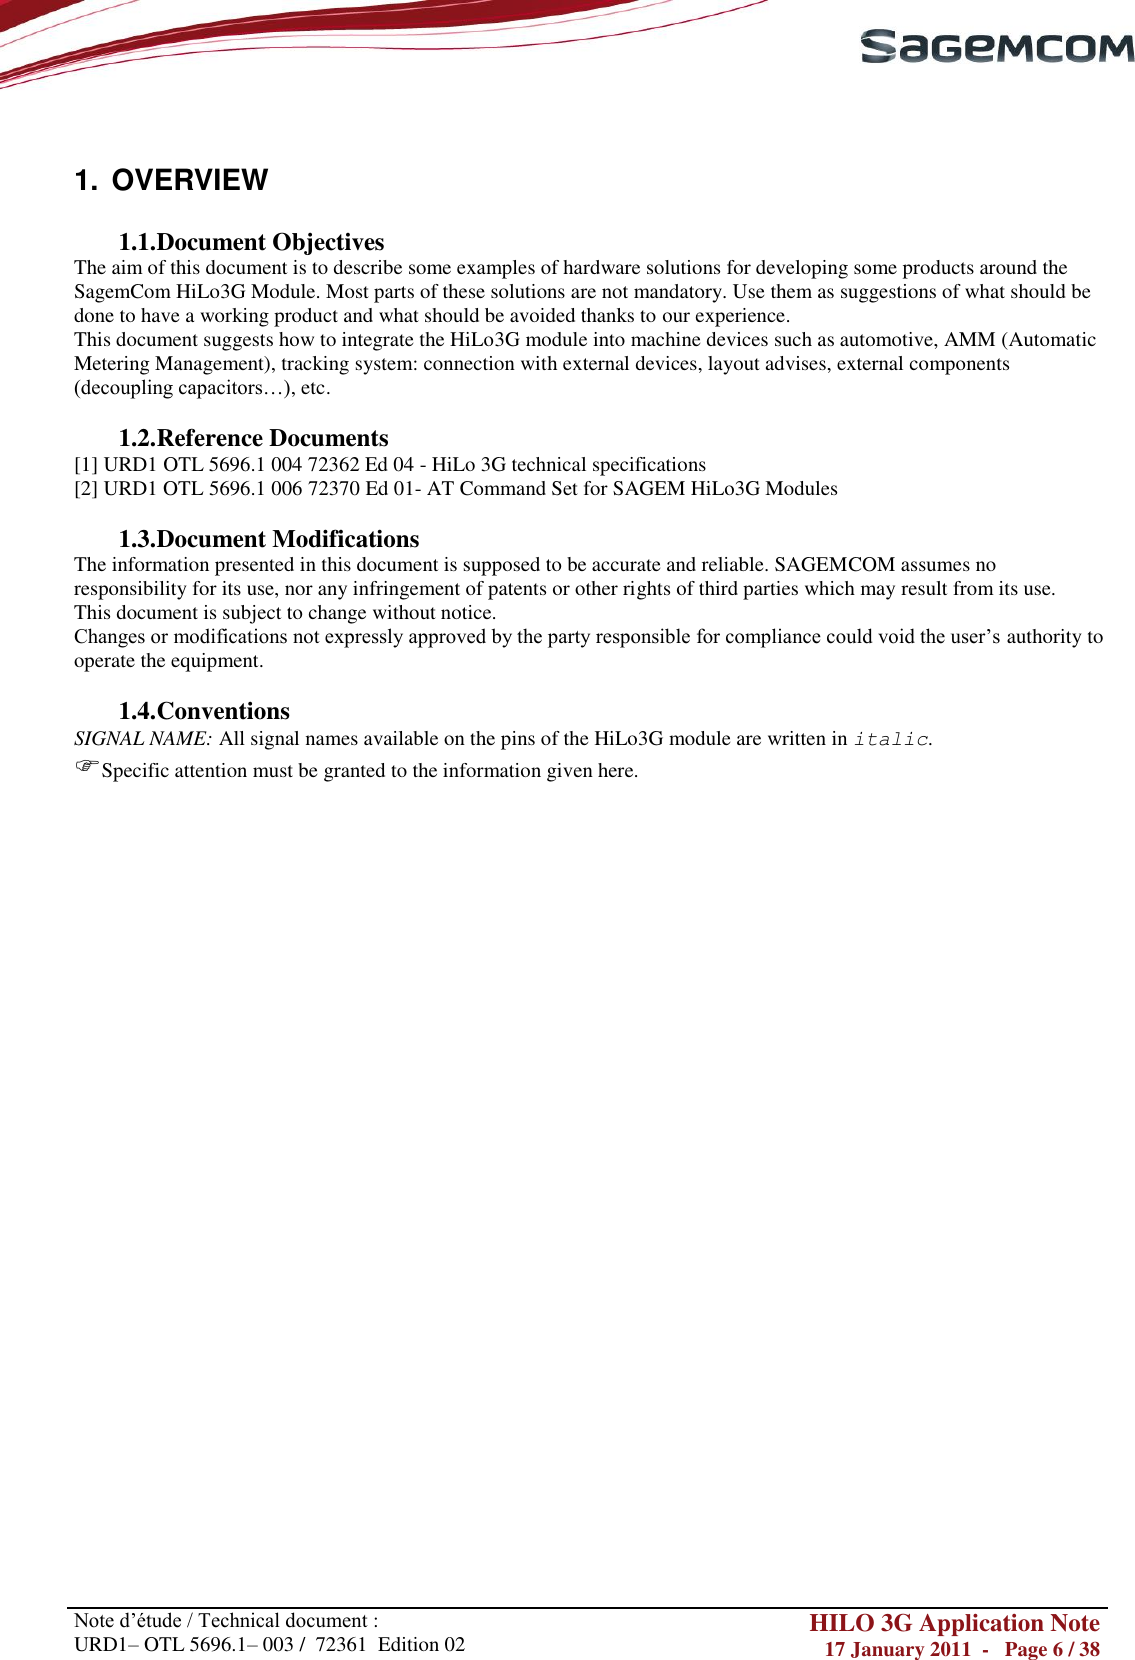       Note d‘étude / Technical document : URD1– OTL 5696.1– 003 /  72361  Edition 02 HILO 3G Application Note 17 January 2011  -   Page 6 / 38     1.  OVERVIEW  1.1. Document Objectives The aim of this document is to describe some examples of hardware solutions for developing some products around the SagemCom HiLo3G Module. Most parts of these solutions are not mandatory. Use them as suggestions of what should be done to have a working product and what should be avoided thanks to our experience. This document suggests how to integrate the HiLo3G module into machine devices such as automotive, AMM (Automatic Metering Management), tracking system: connection with external devices, layout advises, external components (decoupling capacitors…), etc.   1.2. Reference Documents [1] URD1 OTL 5696.1 004 72362 Ed 04 - HiLo 3G technical specifications [2] URD1 OTL 5696.1 006 72370 Ed 01- AT Command Set for SAGEM HiLo3G Modules  1.3. Document Modifications  The information presented in this document is supposed to be accurate and reliable. SAGEMCOM assumes no responsibility for its use, nor any infringement of patents or other rights of third parties which may result from its use. This document is subject to change without notice. Changes or modifications not expressly approved by the party responsible for compliance could void the user‘s authority to operate the equipment.  1.4. Conventions SIGNAL NAME: All signal names available on the pins of the HiLo3G module are written in italic. Specific attention must be granted to the information given here.                                